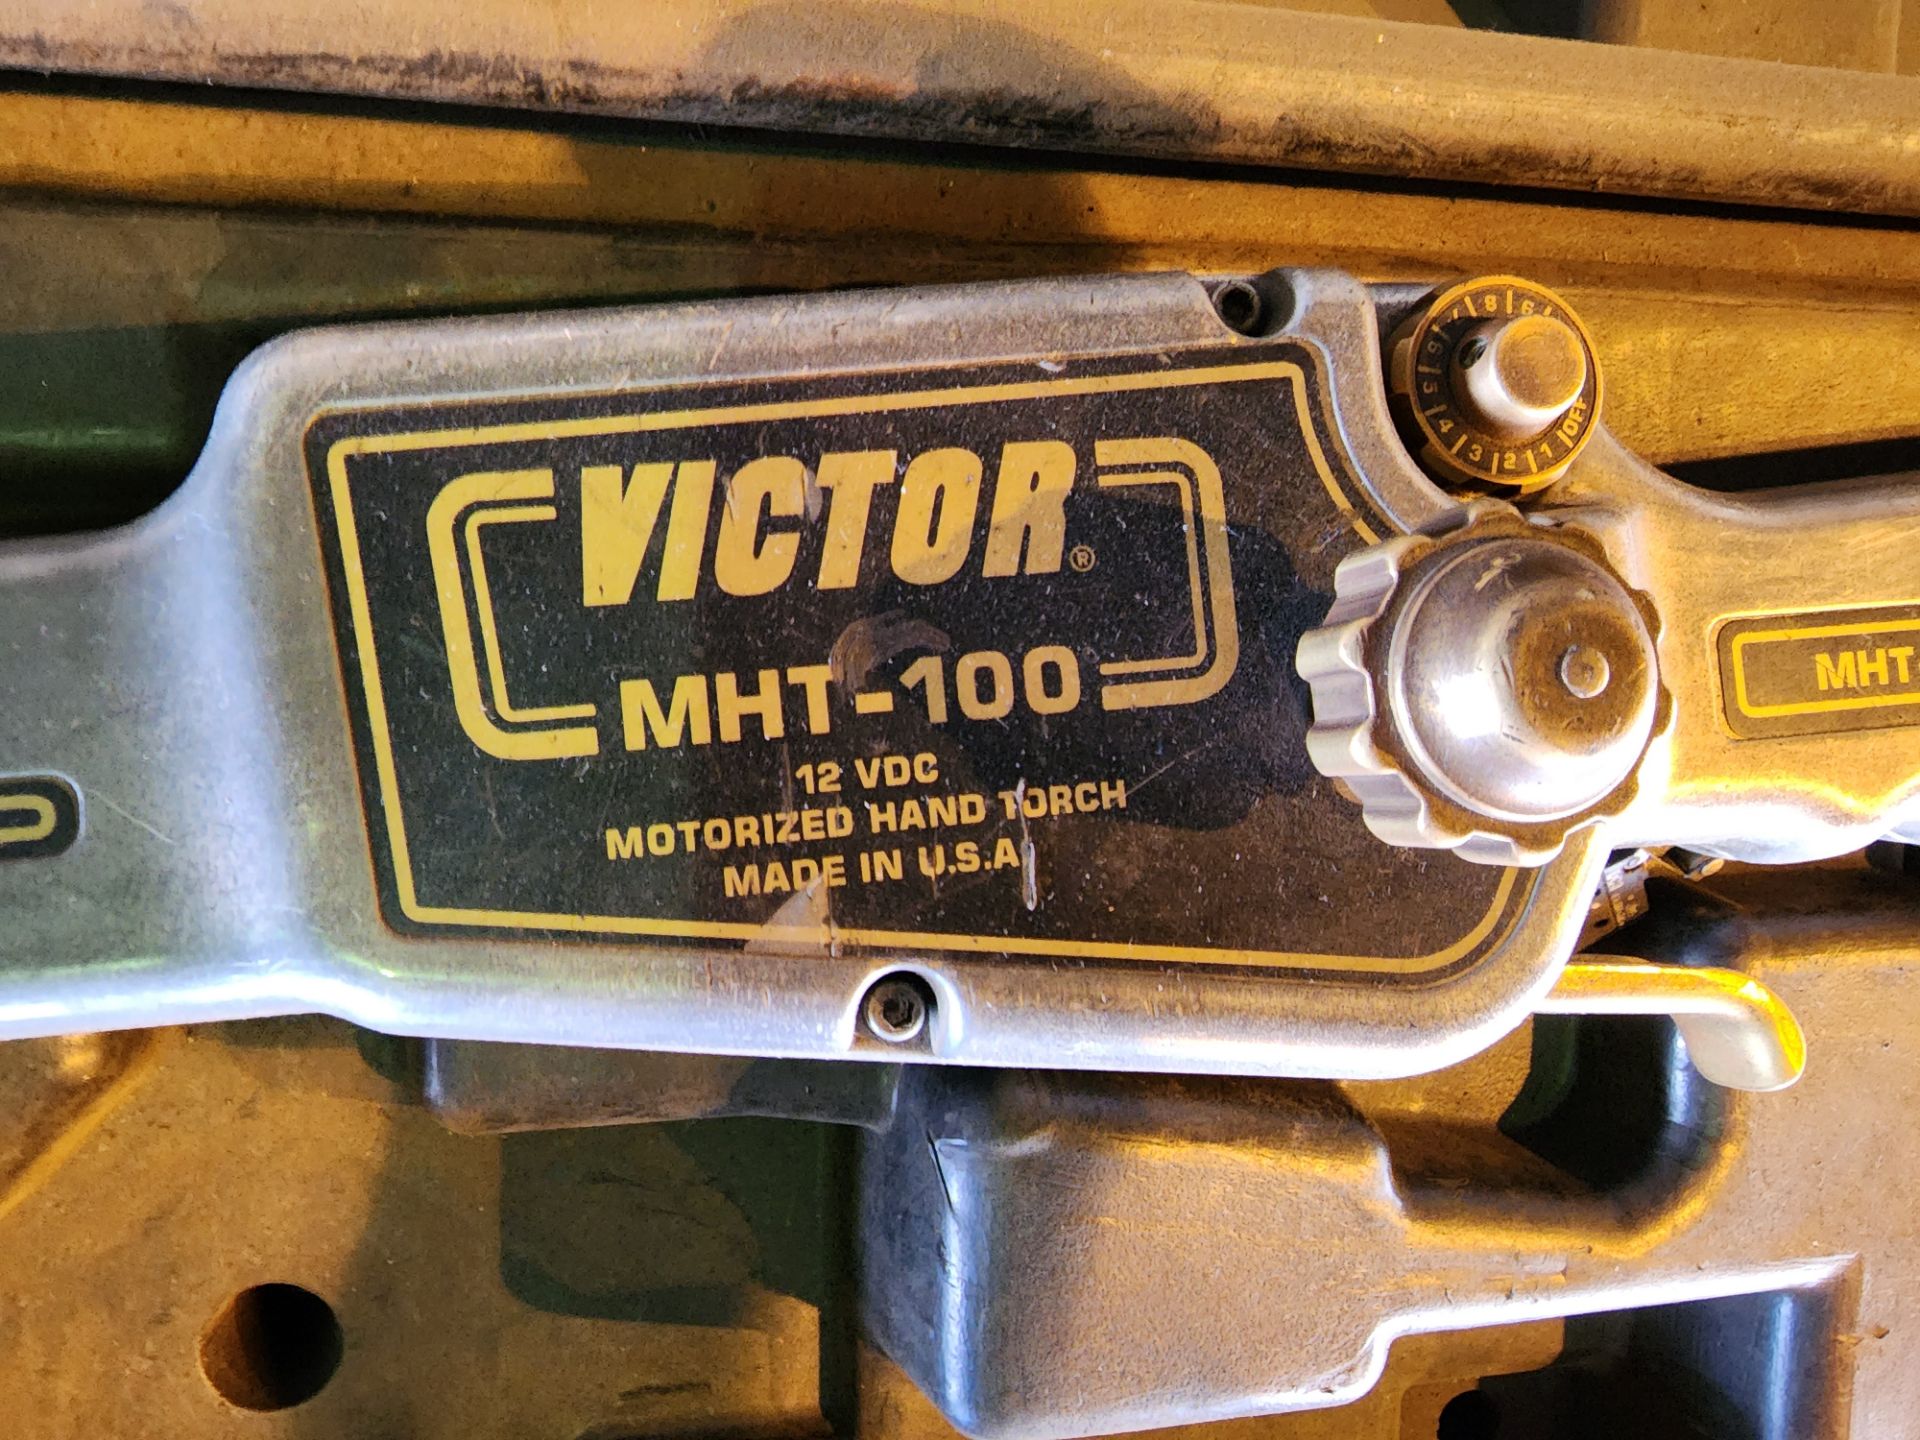 Victor MHT-100 Motorized Hand Torch 12 vdc - Image 6 of 6